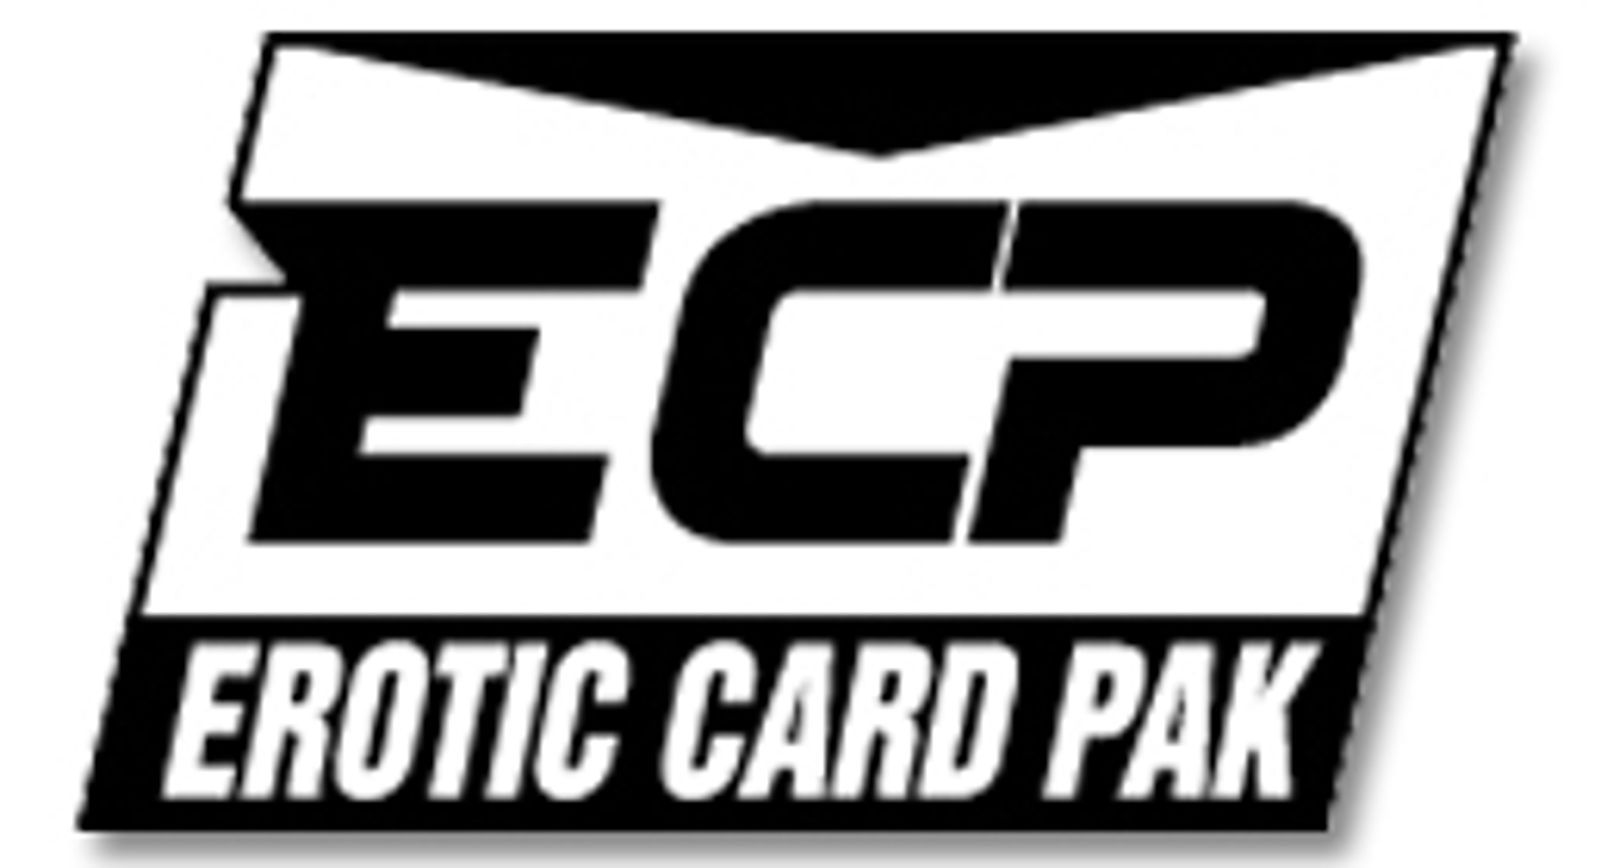 Erotic Card Pack Deadline Approaching